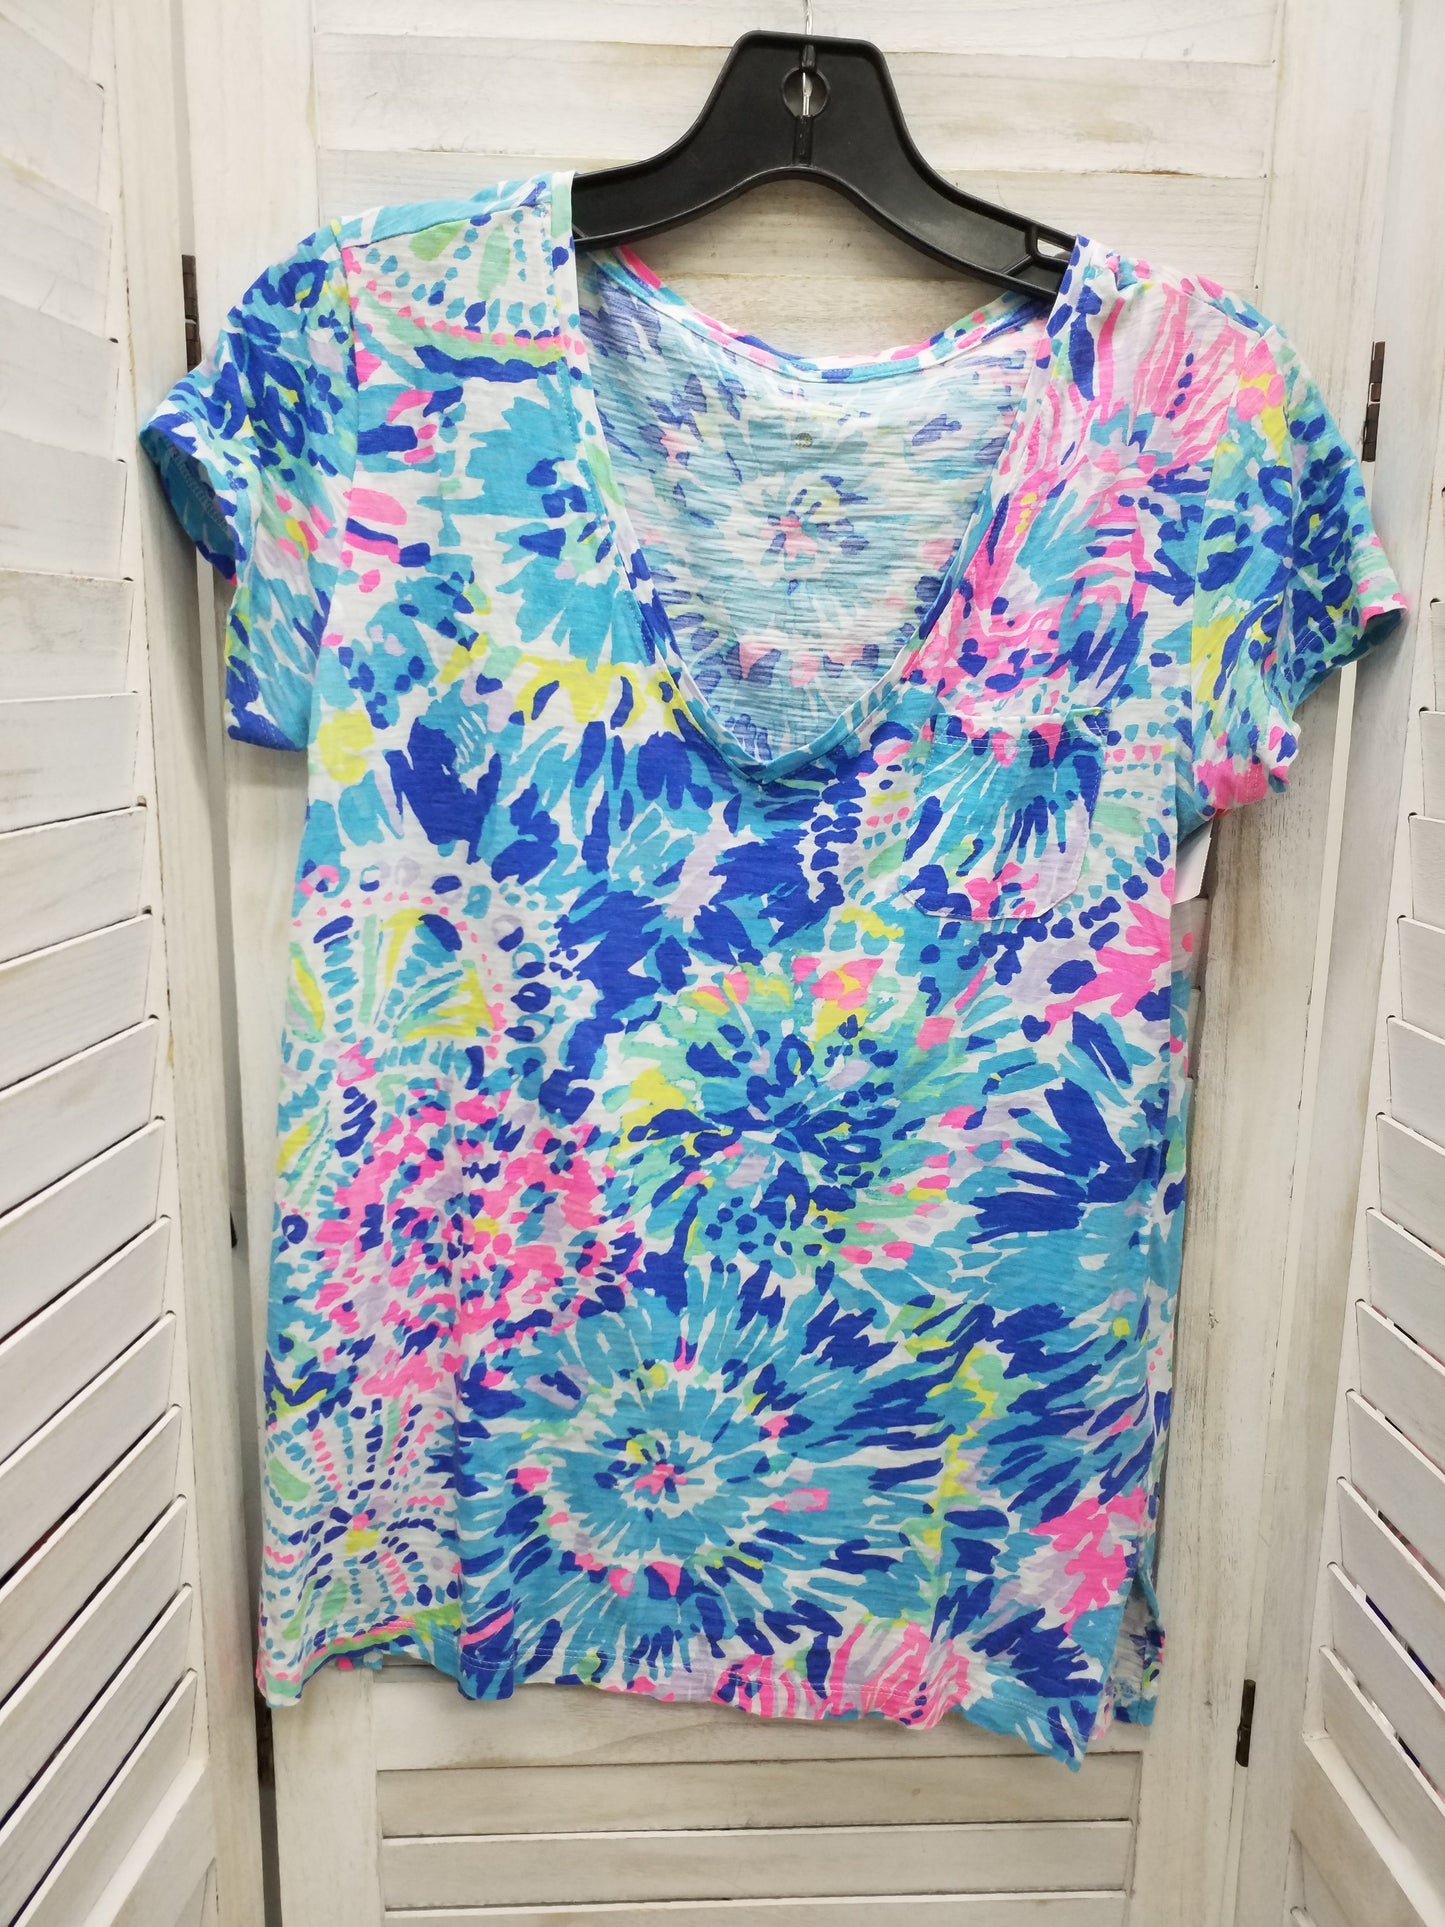 Multi-colored Top Short Sleeve Lilly Pulitzer, Size Xs